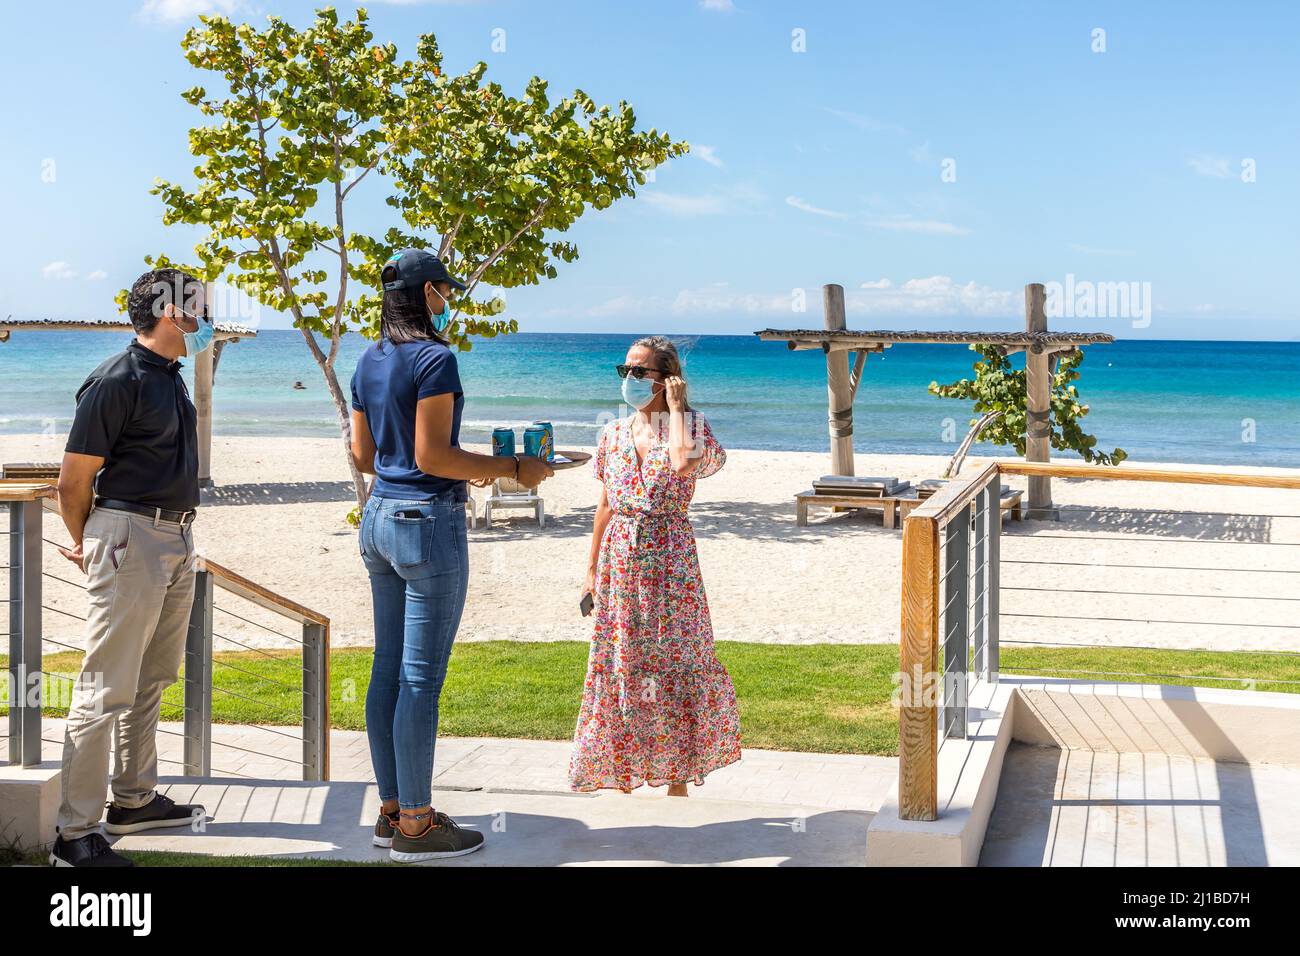 ILLUSTRATION OF THE DECLINE IN THE NUMBER OF RESORT BOOKINGS, PROTECTIVE MEASURES AND SOCIAL DISTANCING DURING THE COVID 19 PANDEMIC, BEACH OF THE WESTIN PUNTA CANA RESORT & CLUB, DOMINICAN REPUBLIC Stock Photo